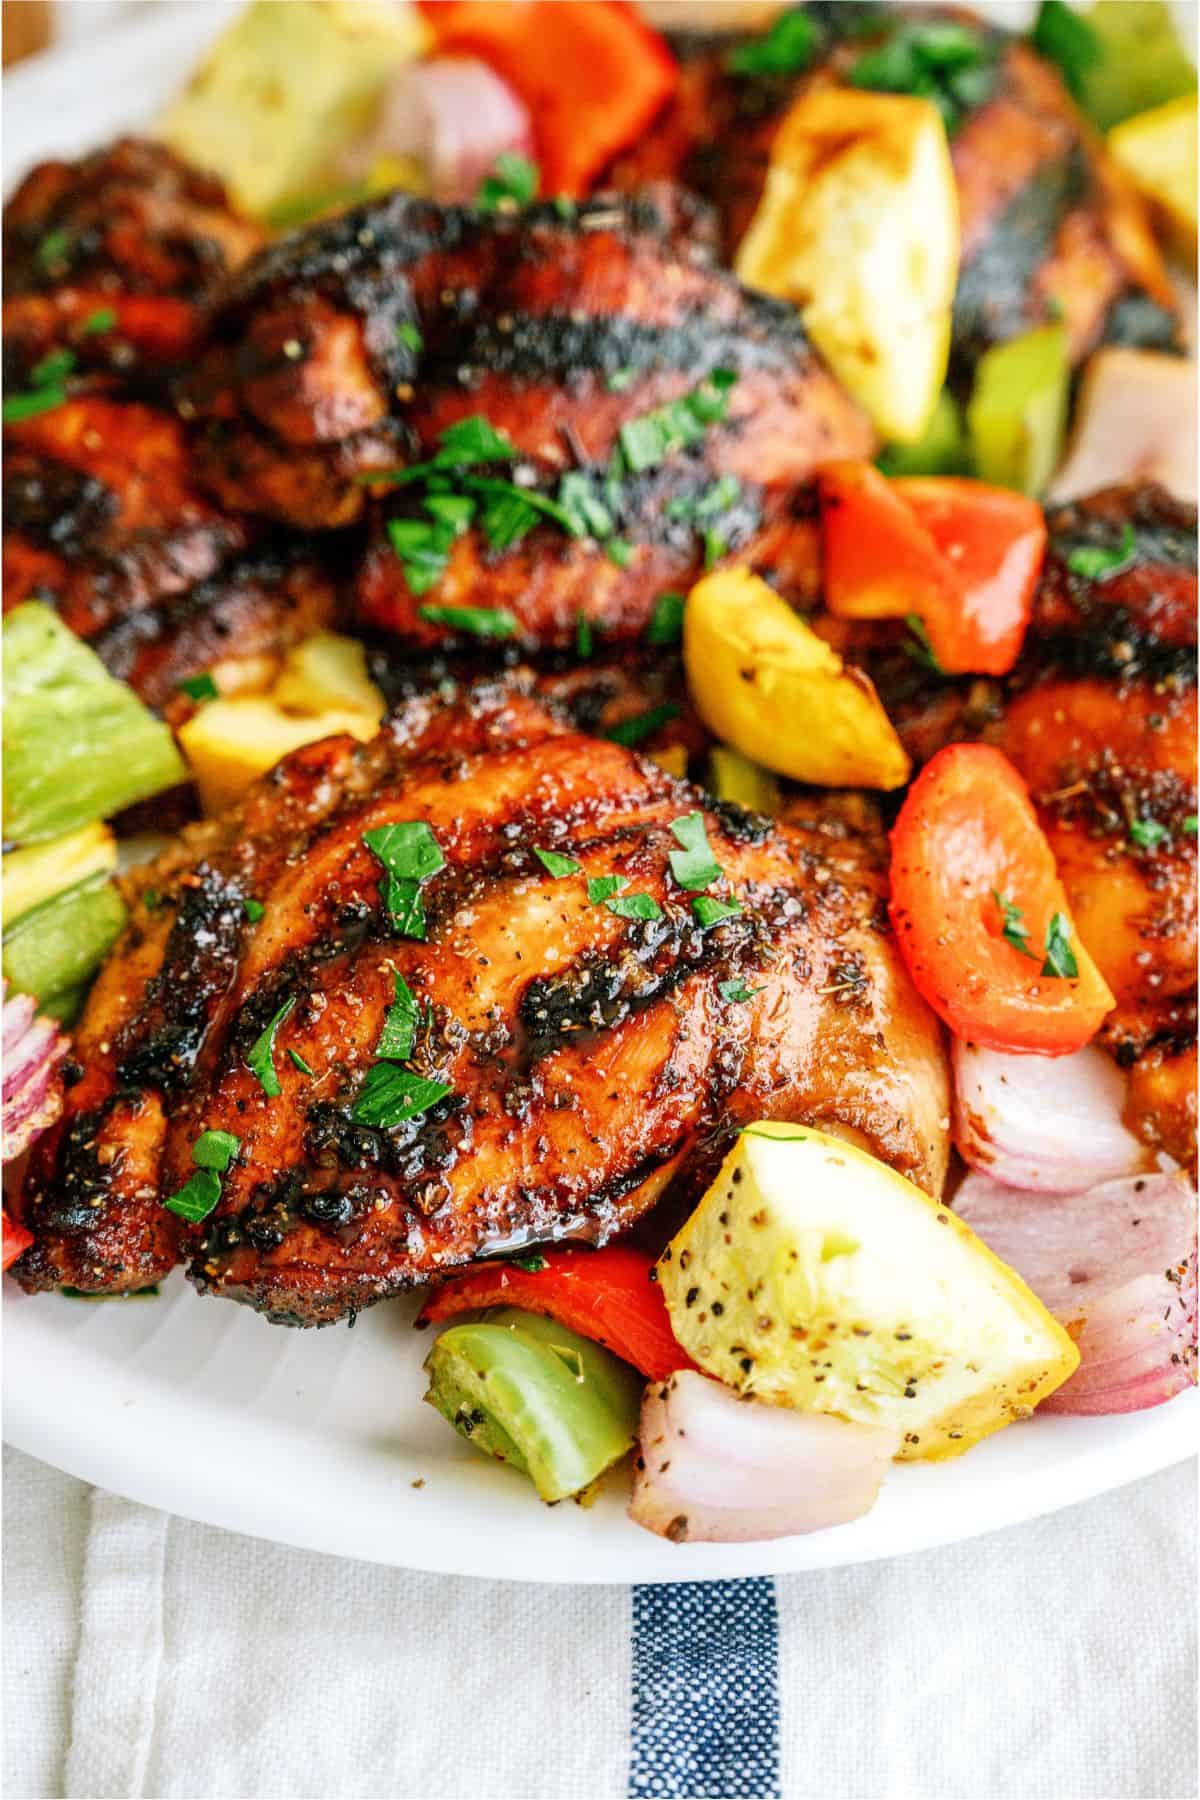 A plate of Grilled Boneless Chicken Thighs and grilled veggies